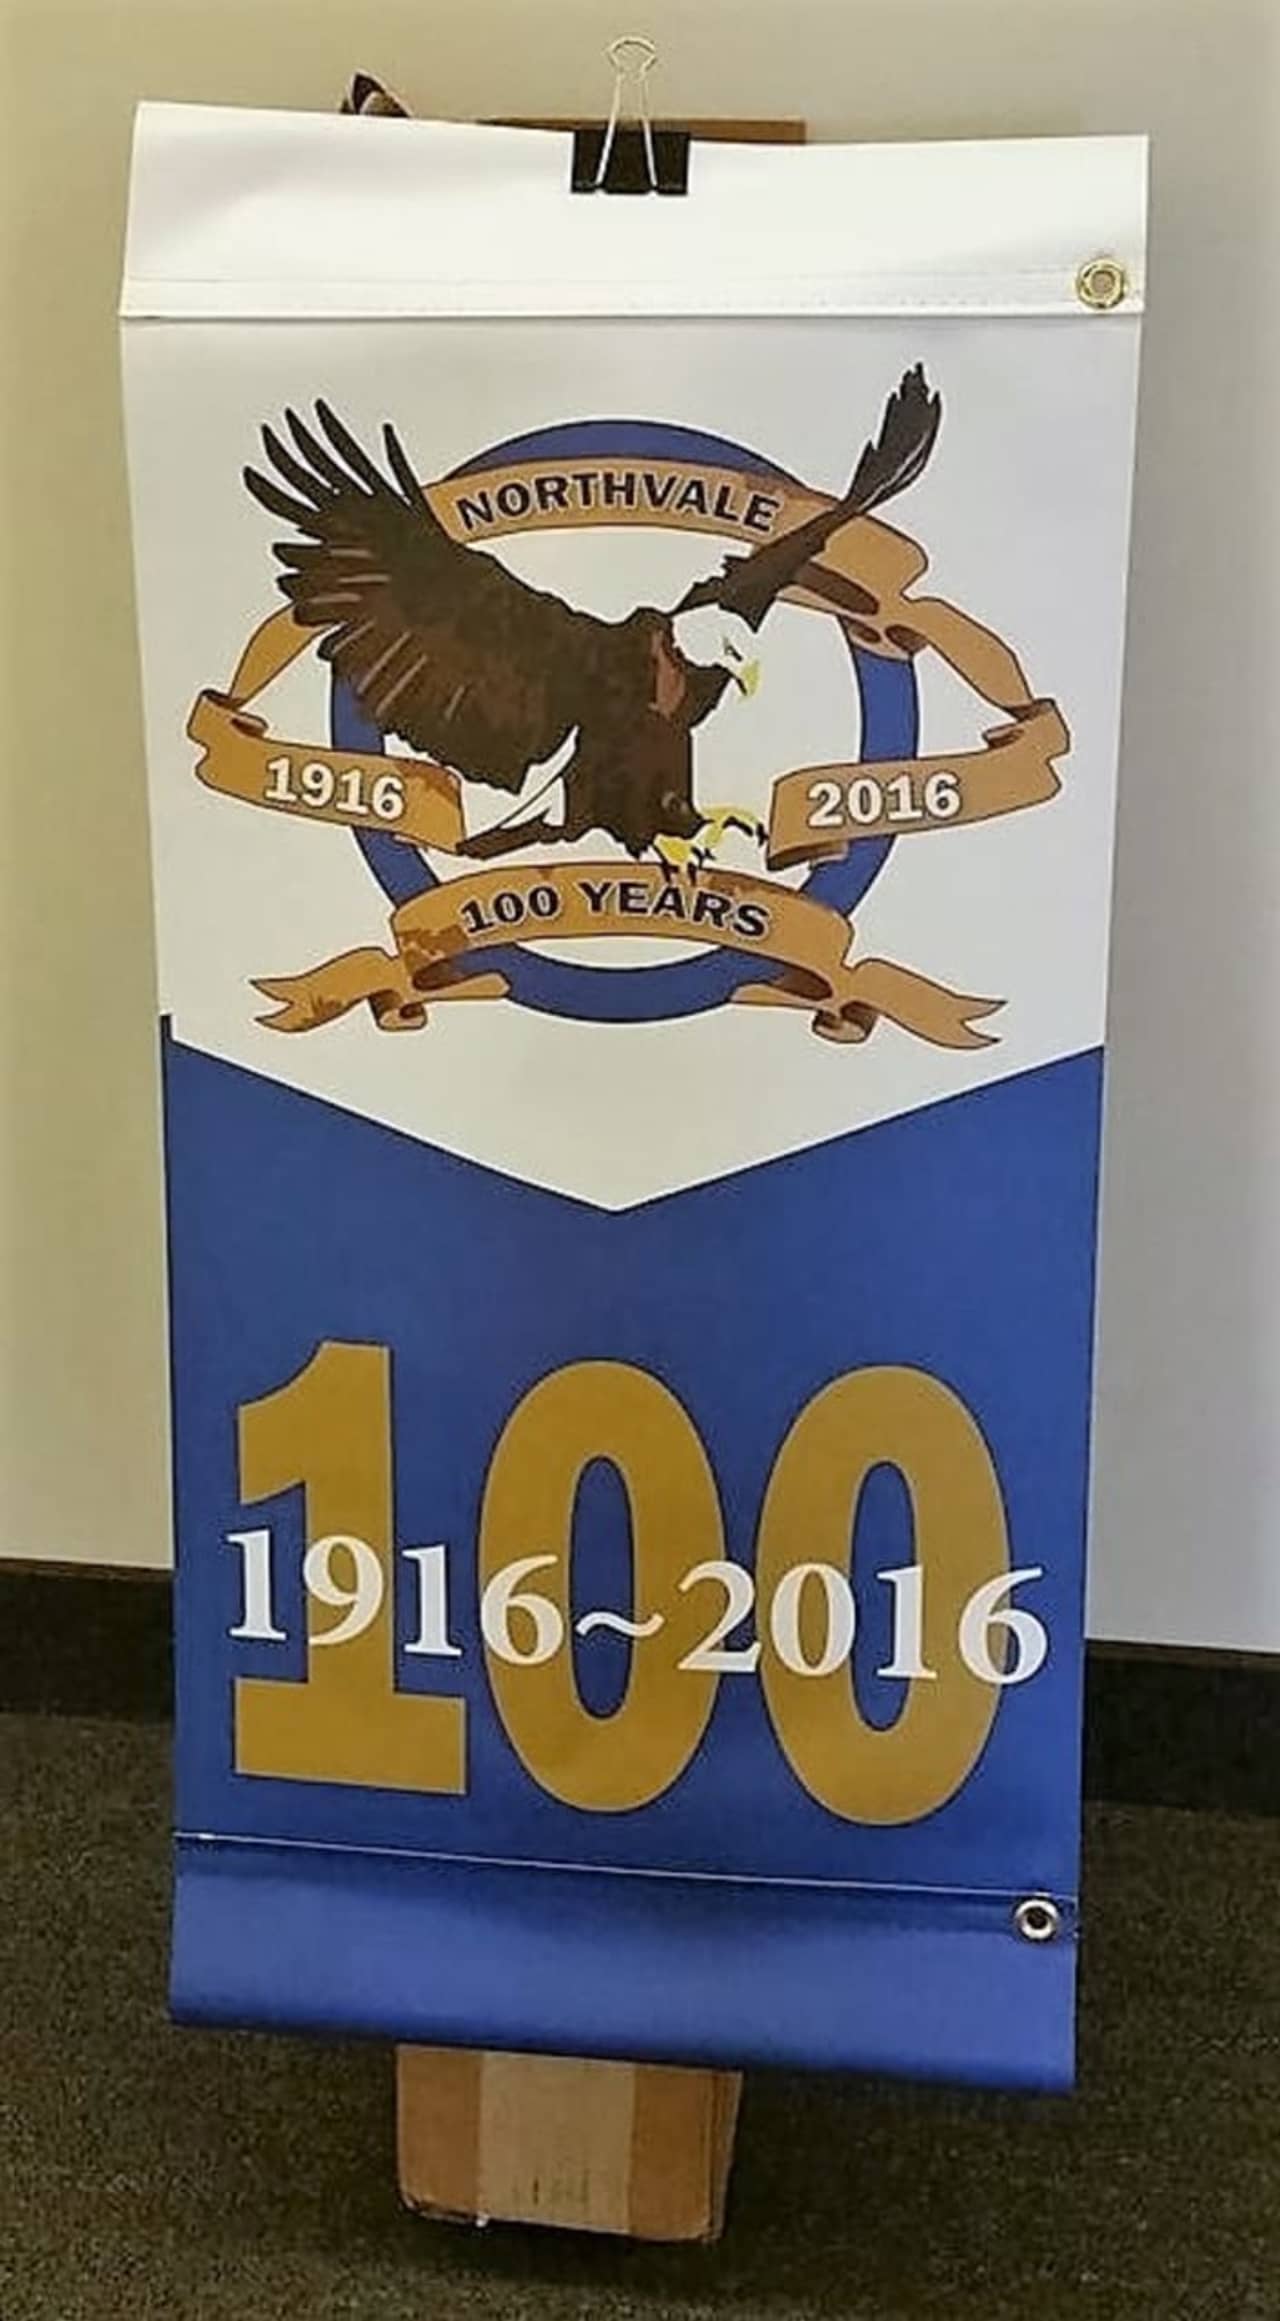 Street banners mark the centennial of Northvale, celebrated at various events all year.